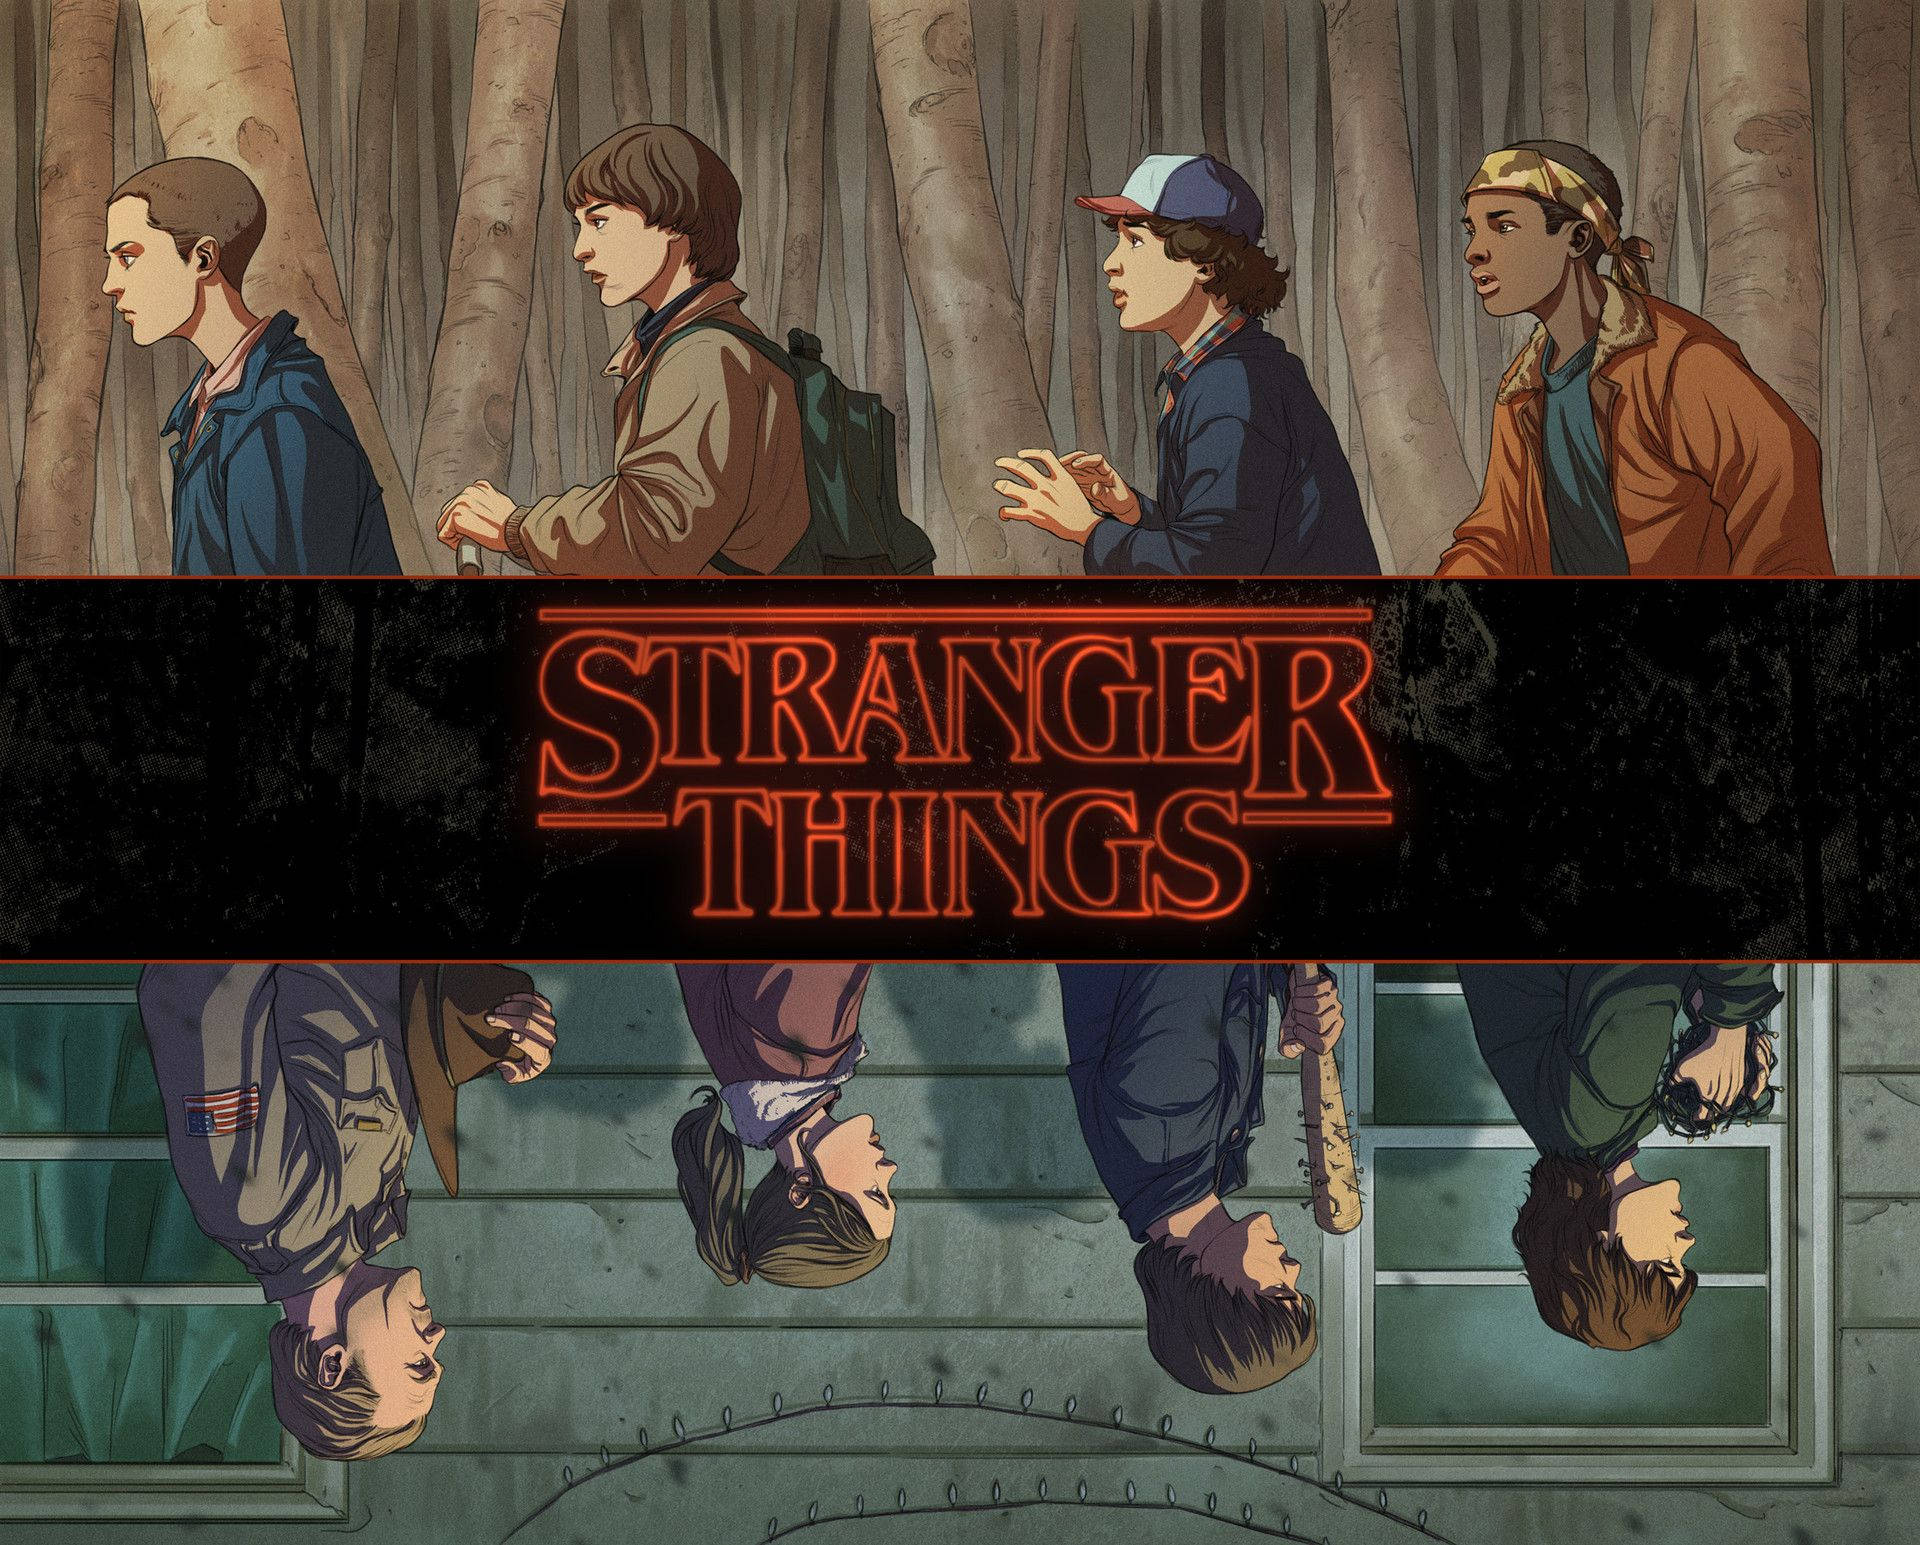 A Stranger Things Aesthetic - Dreamy and Surreal Wallpaper